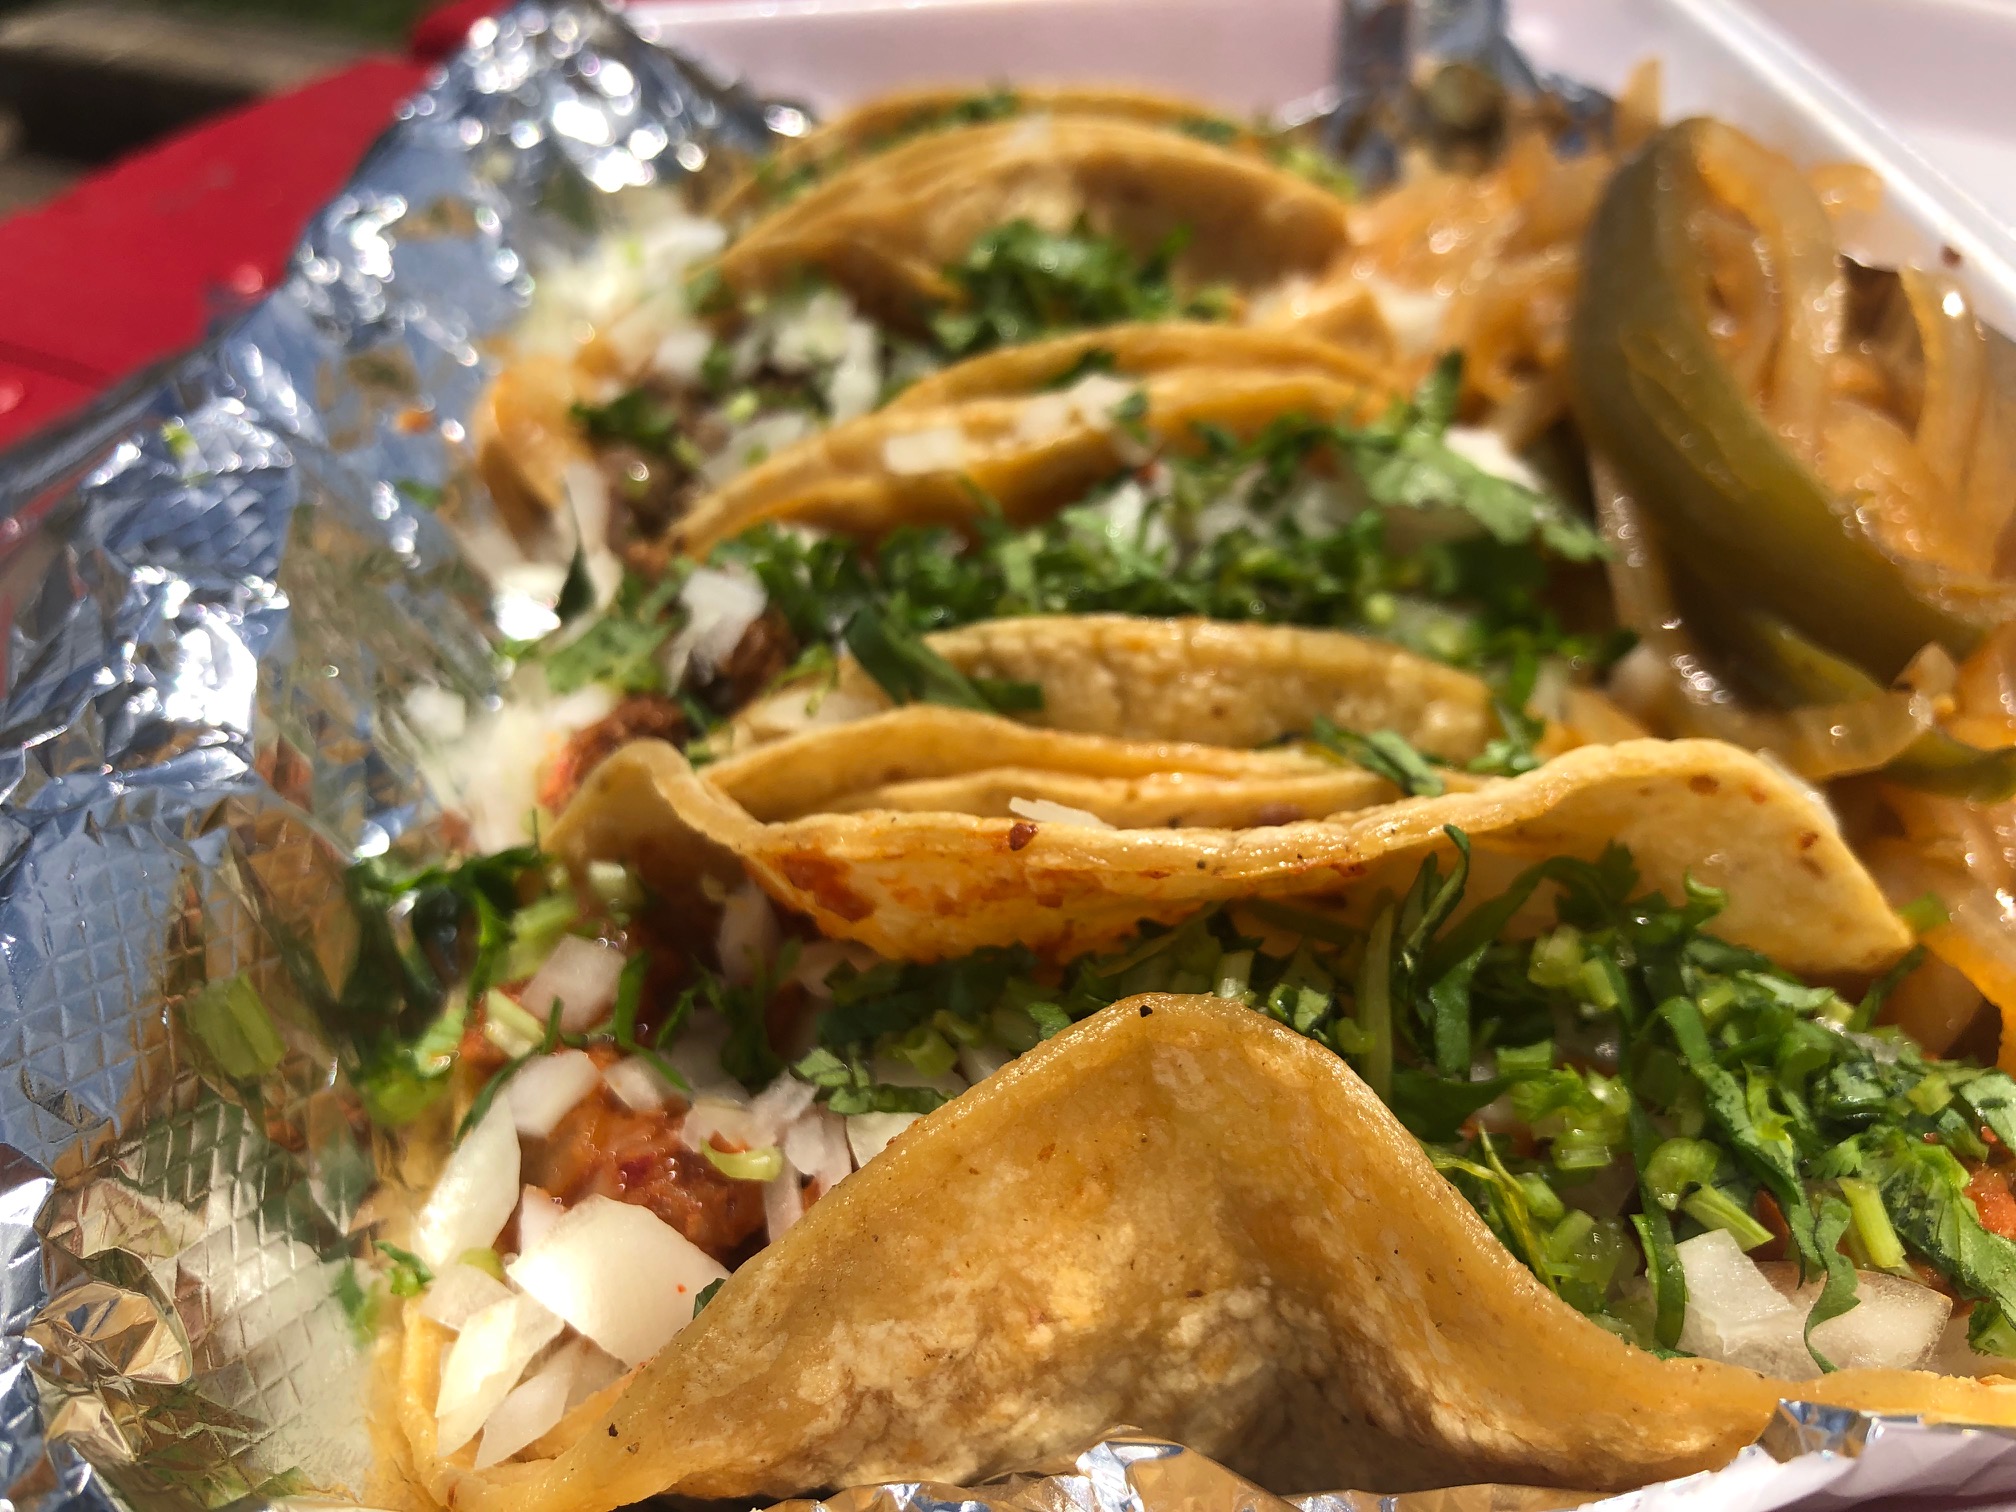 Four tacos on corn tortillas loaded with raw diced white onion and cilantro sit in a tin foiled takeout container. Photo by Alyssa Buckley.